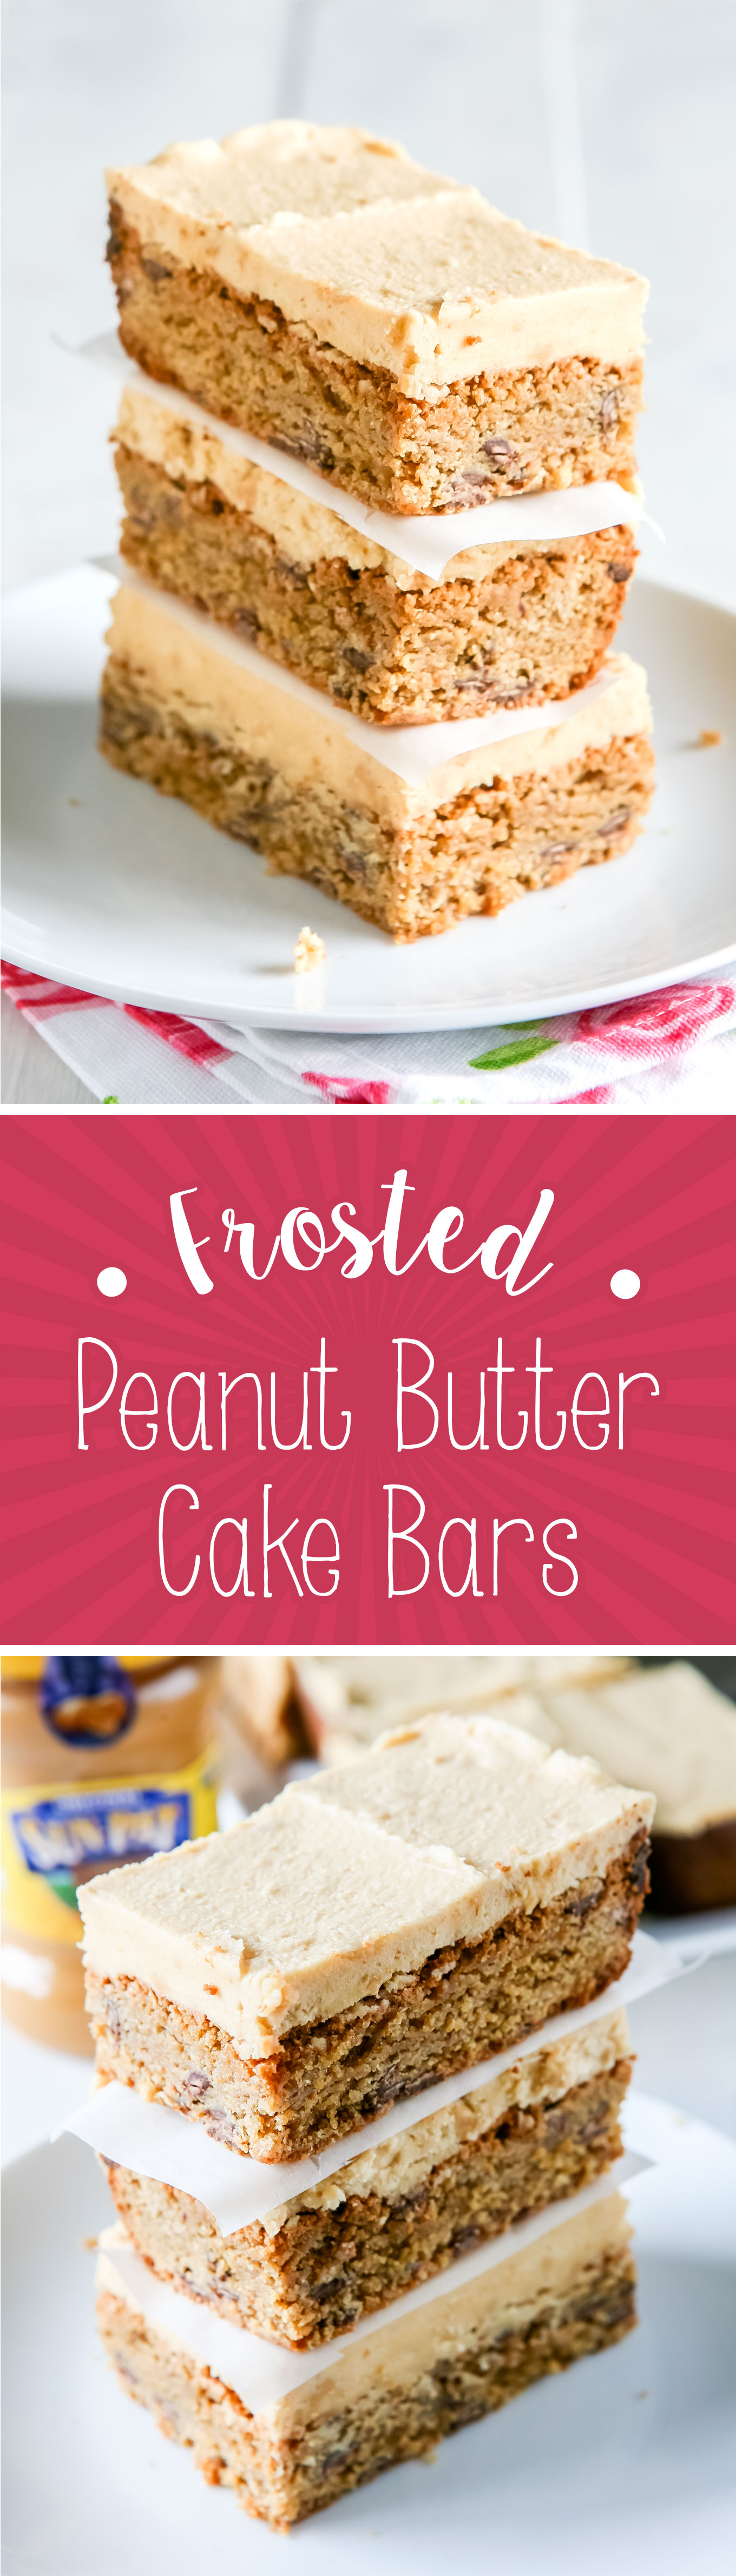 Frosted Peanut Butter Cake Bars Recipe by Sweet2EatBaking.com | These Frosted Peanut Butter Cake Bars are a peanut butter lovers dream! These cake bars are jam packed with peanut butter and milk chocolate chips.